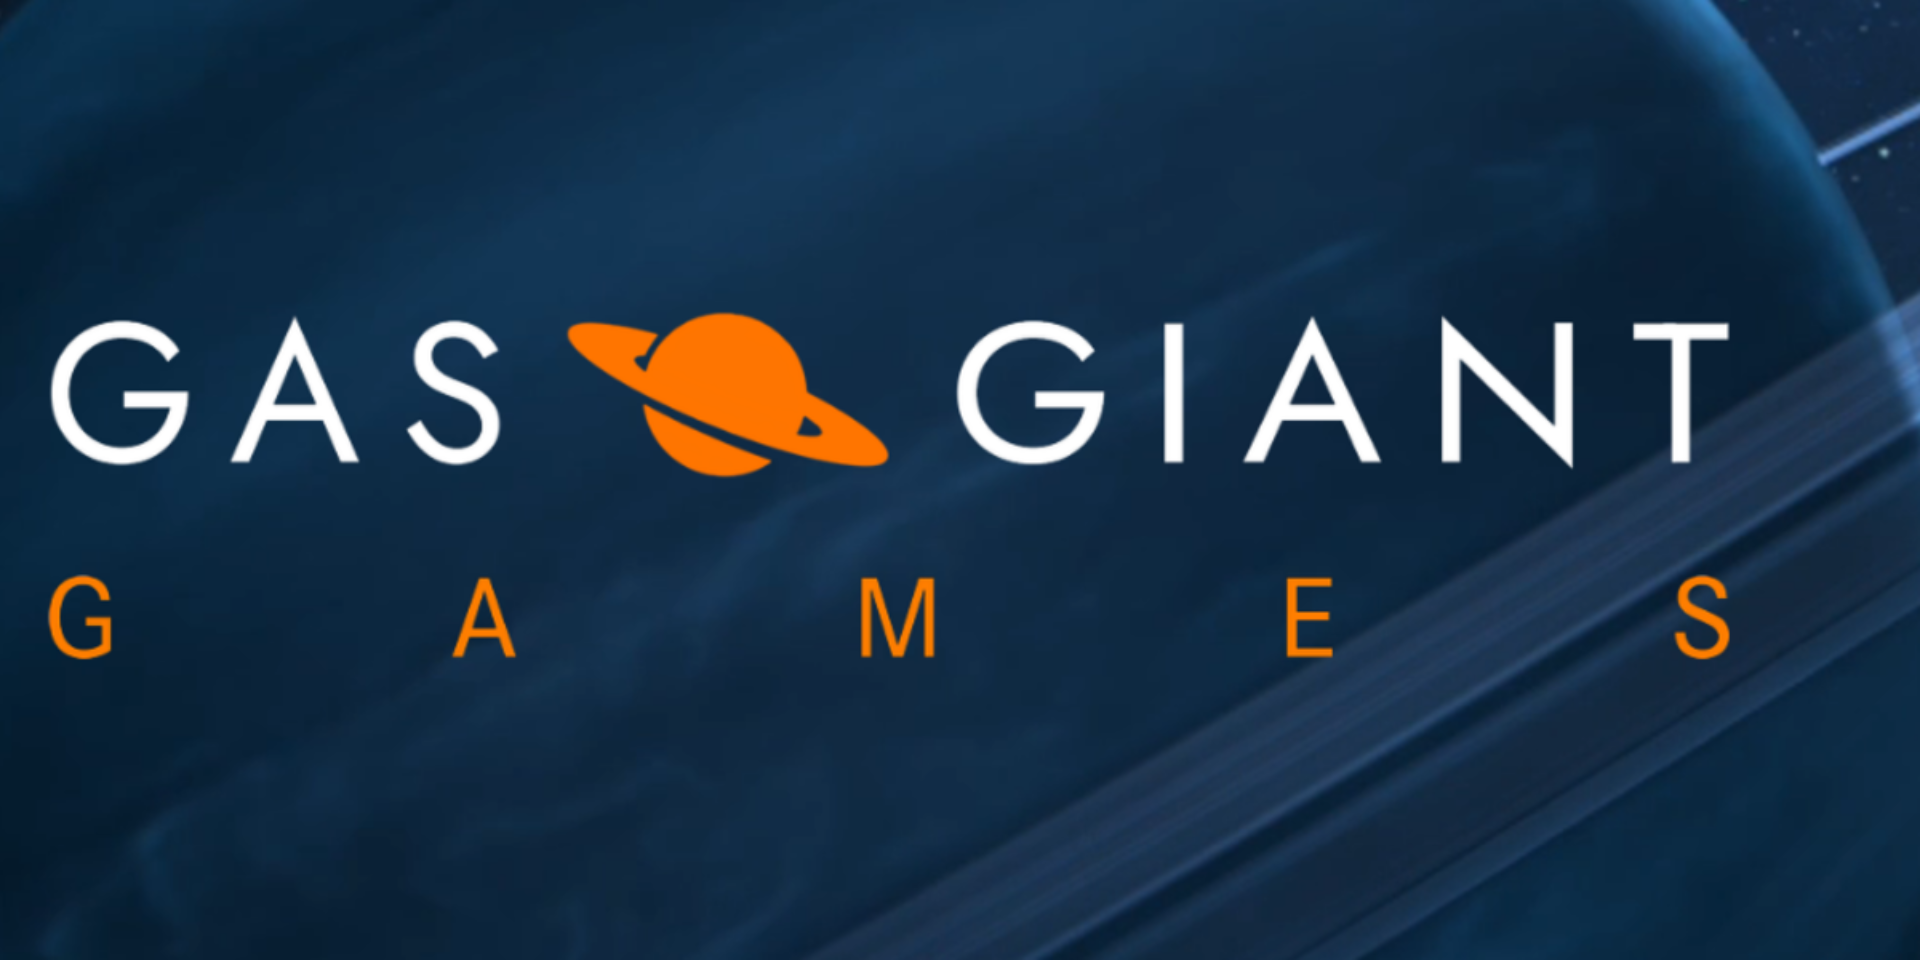 Blizzard expats have set up Gas Giant Games